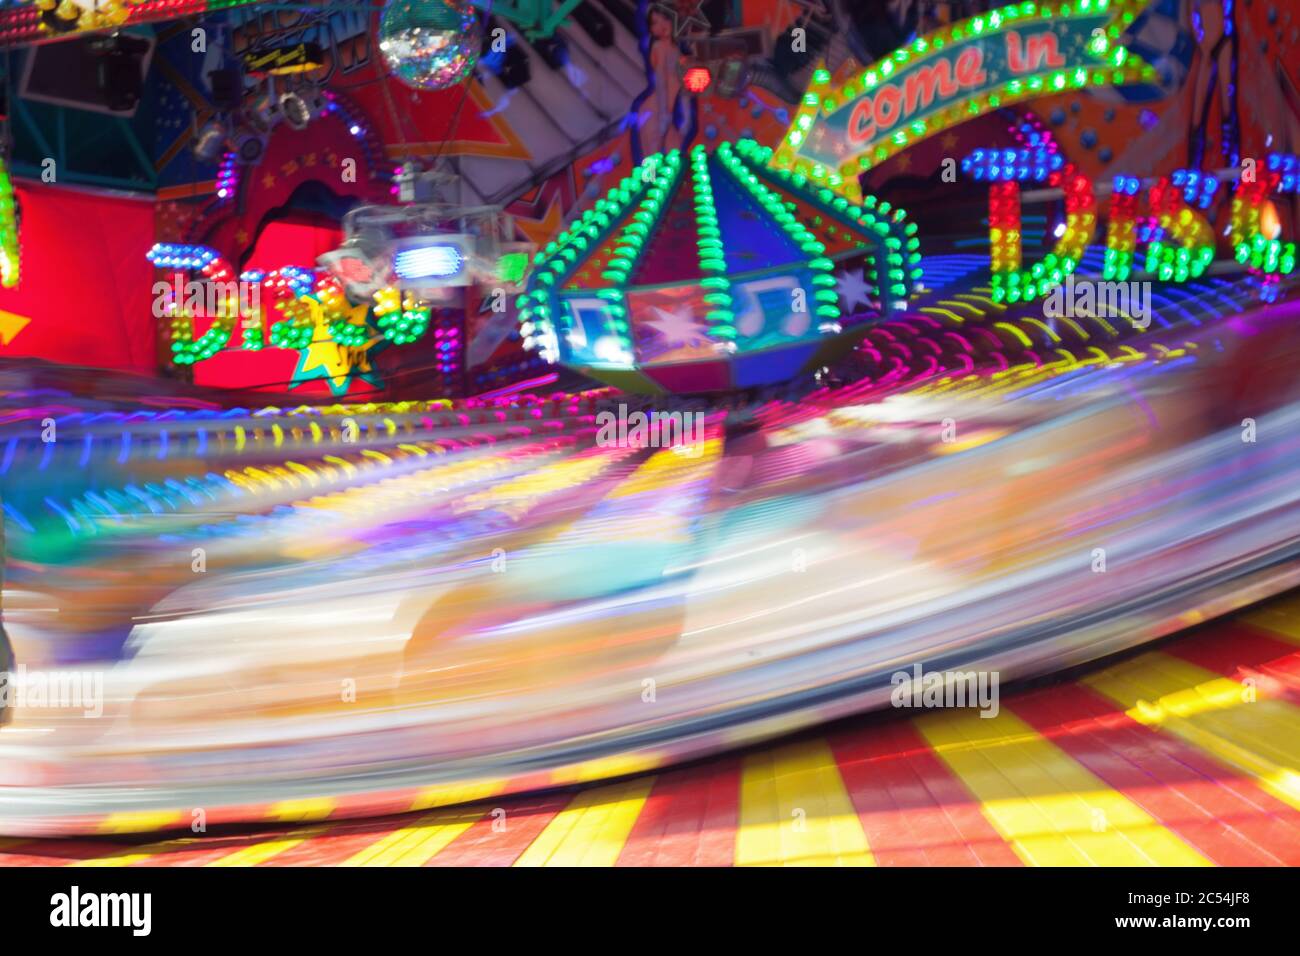 a coloured carousel on the fair in movement Stock Photo